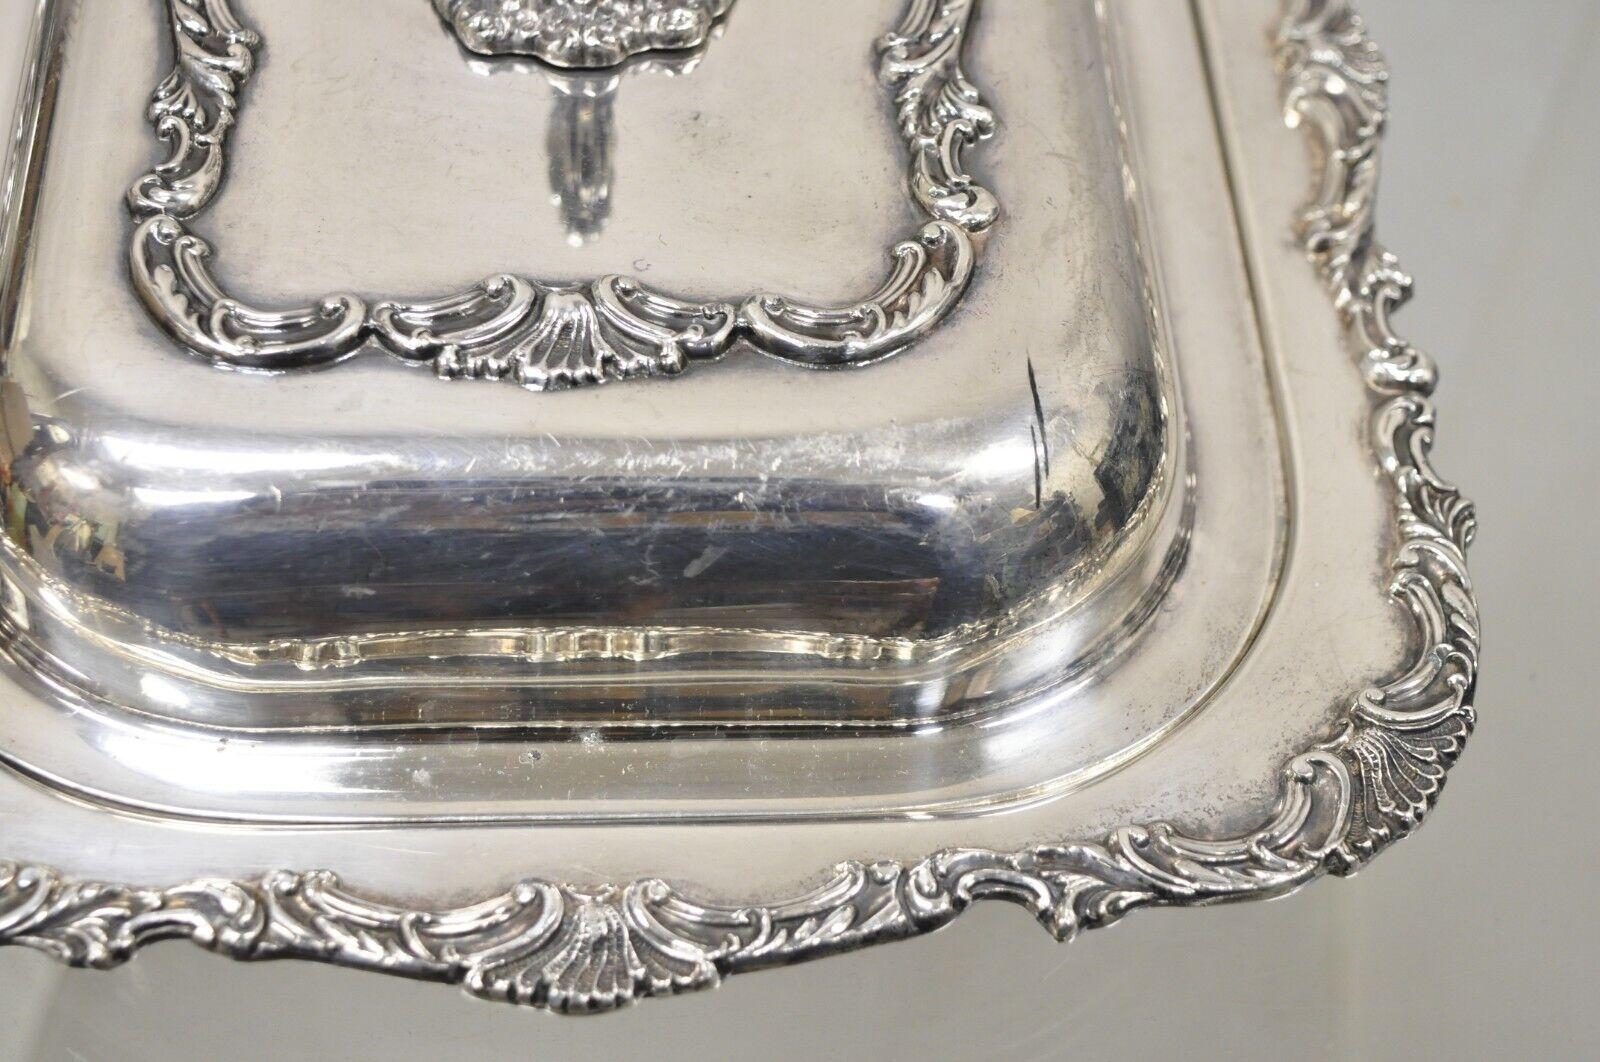 Vintage Silver Plated Victorian Style Ornate Lidded Covered Serving Dish 2